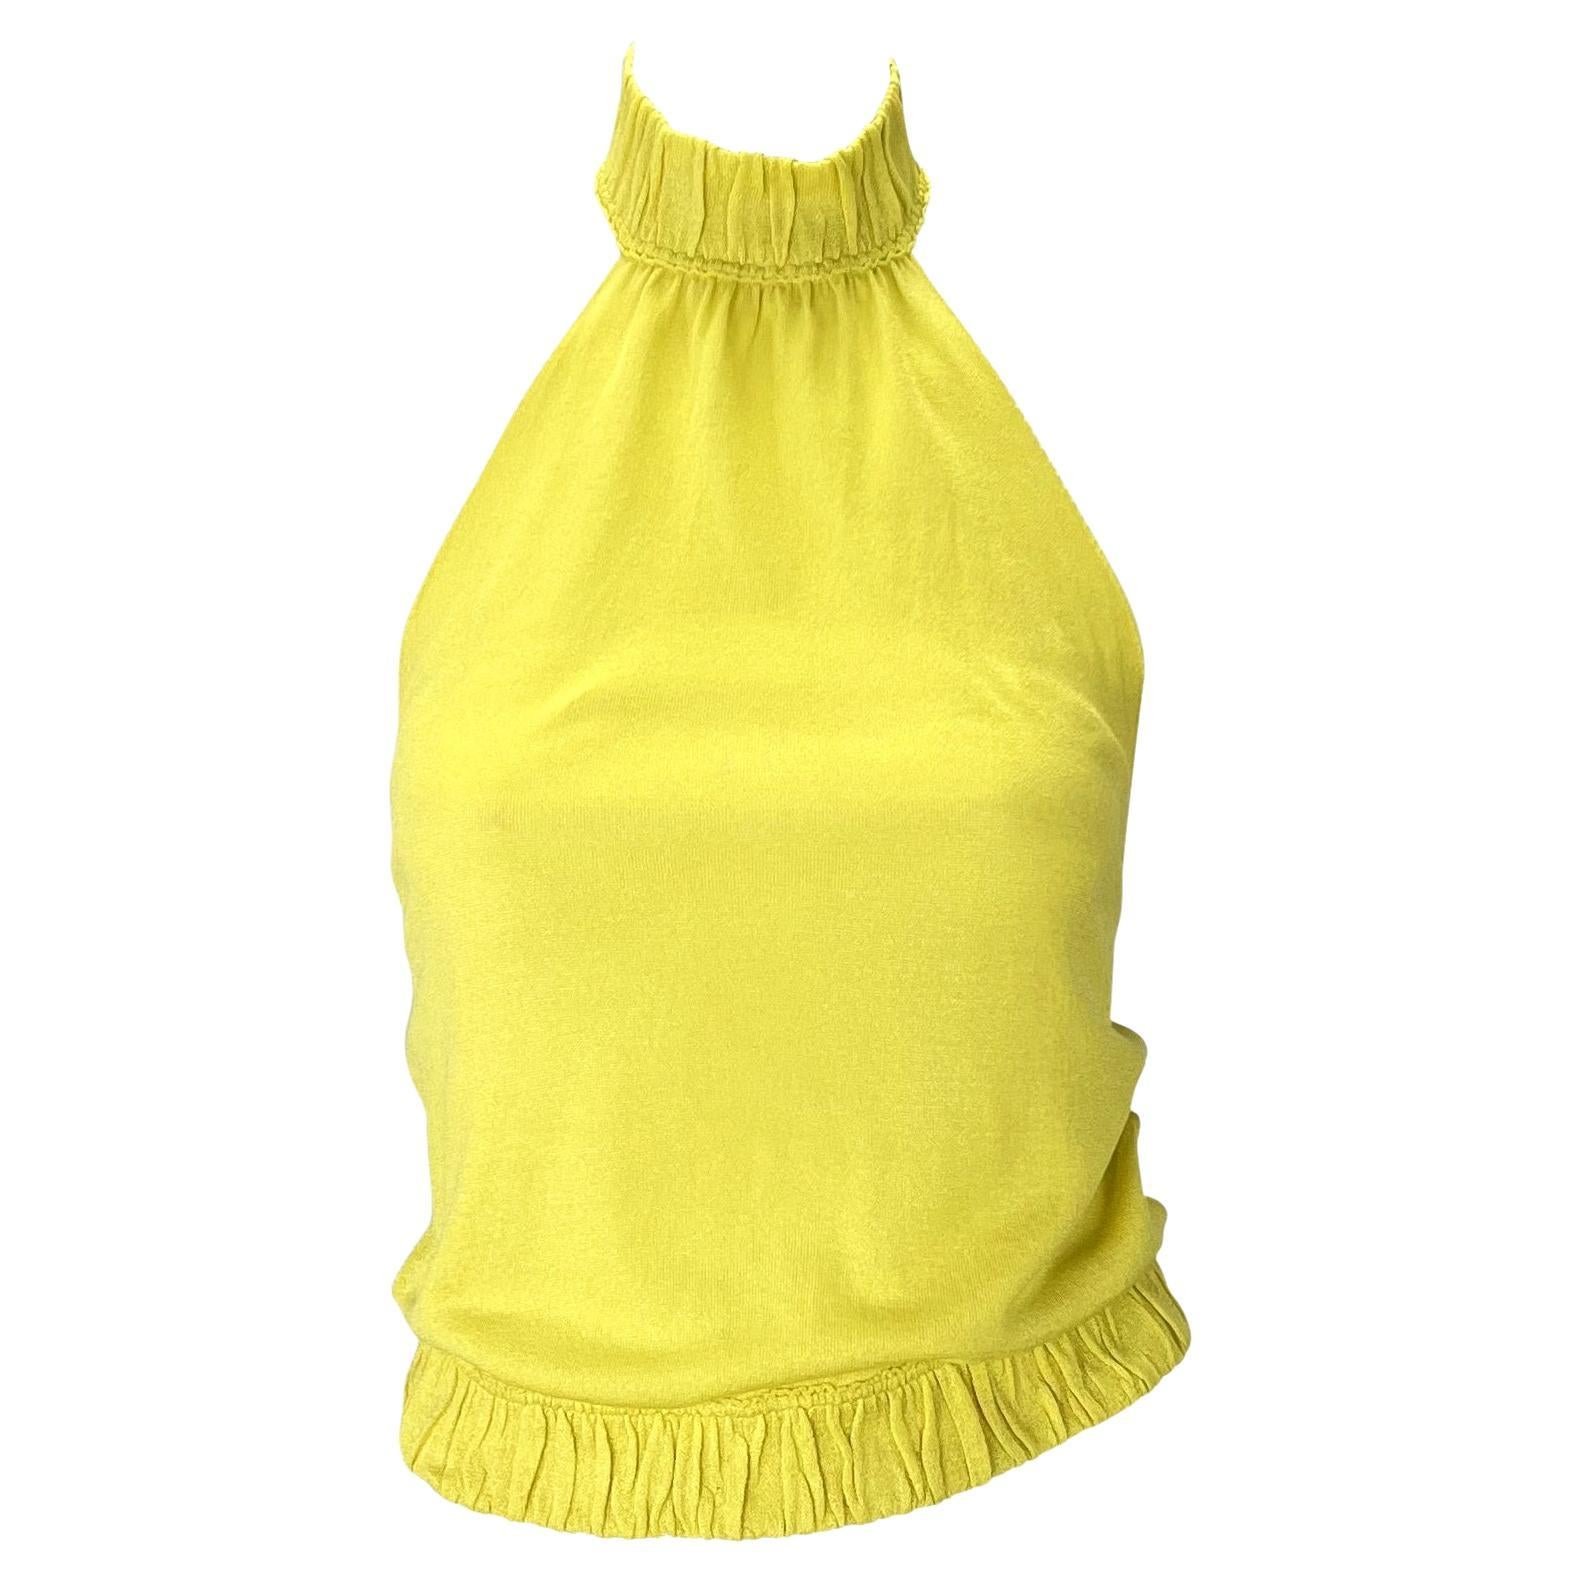 S/S 1999 Gucci by Tom Ford Yellow Silk Backless Sheer Stretch Knit Top In Excellent Condition For Sale In West Hollywood, CA